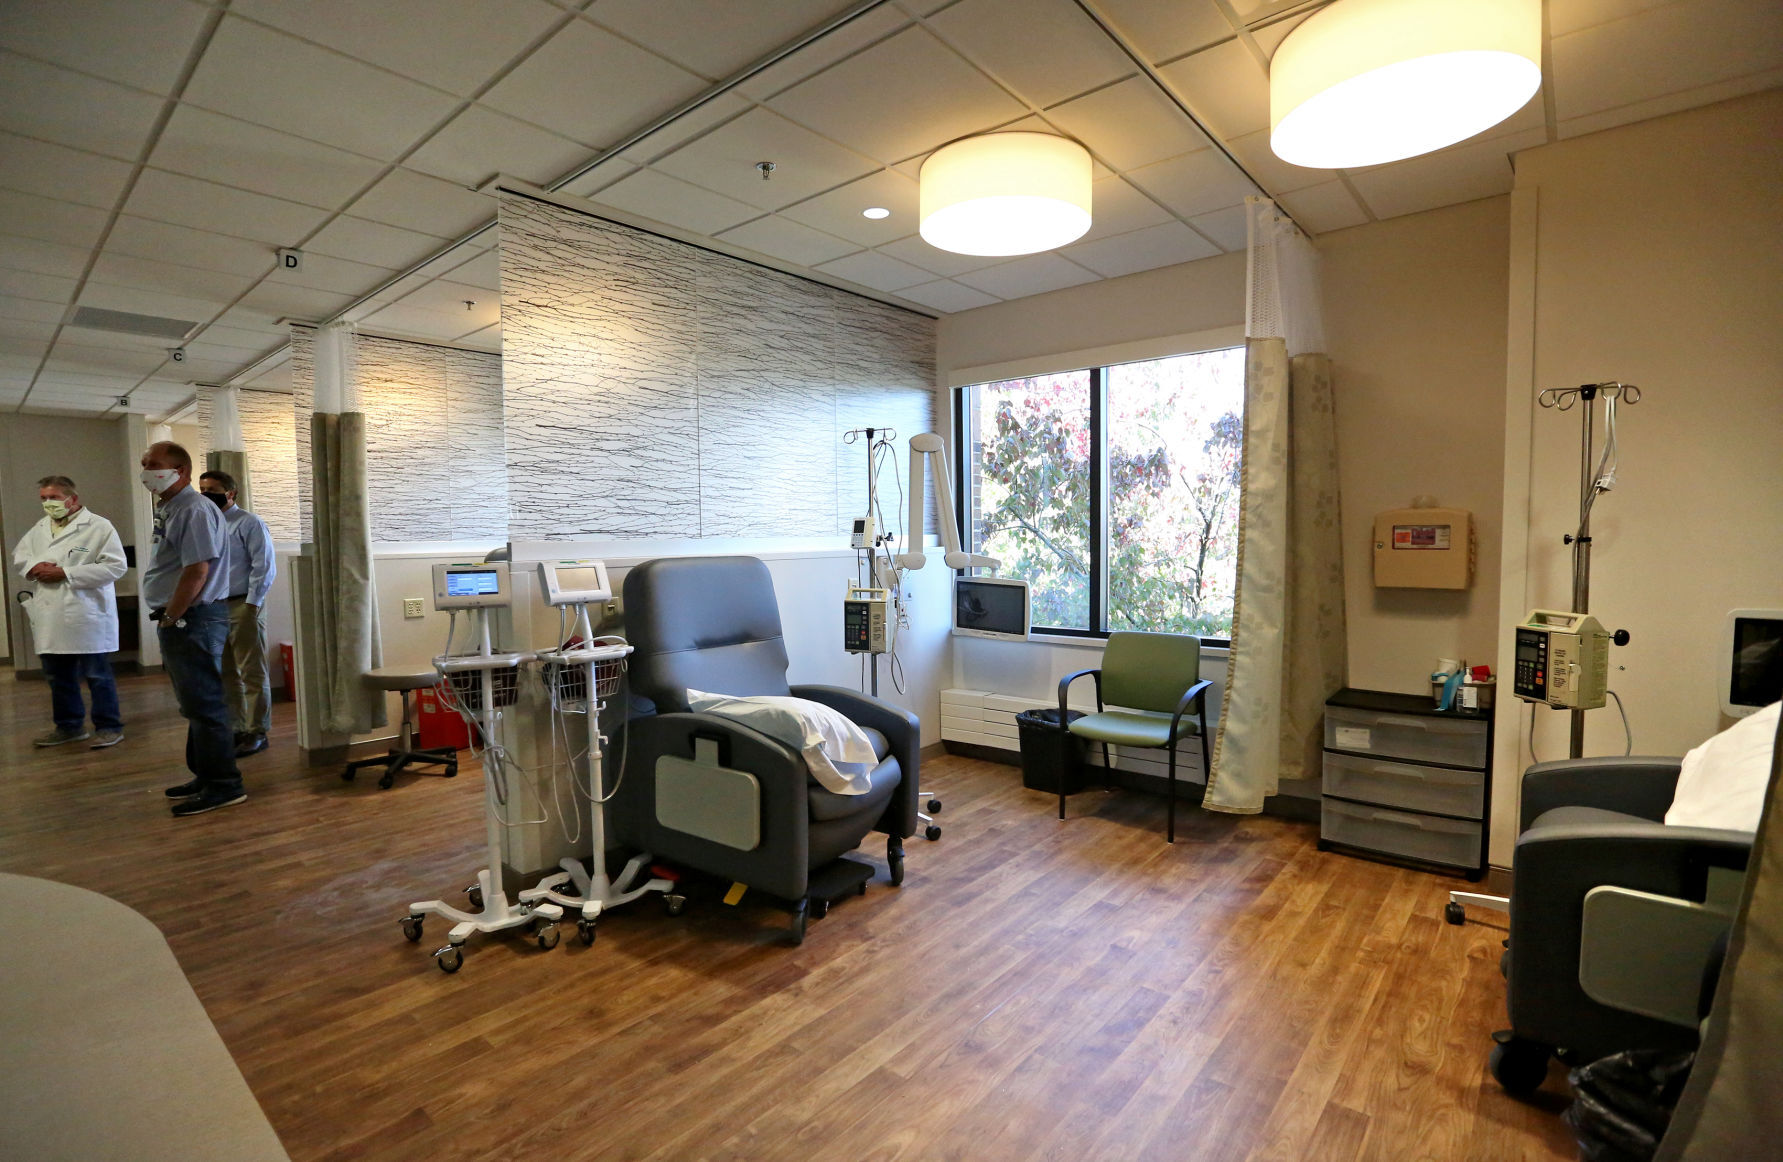 An infusion bay at the new Integrated Cancer Center in Dubuque on Friday, Sept. 25, 2020. The center is a collaboration between UnityPoint Health-Finley Hospital and Grand River Medical Group and will be located on Finley